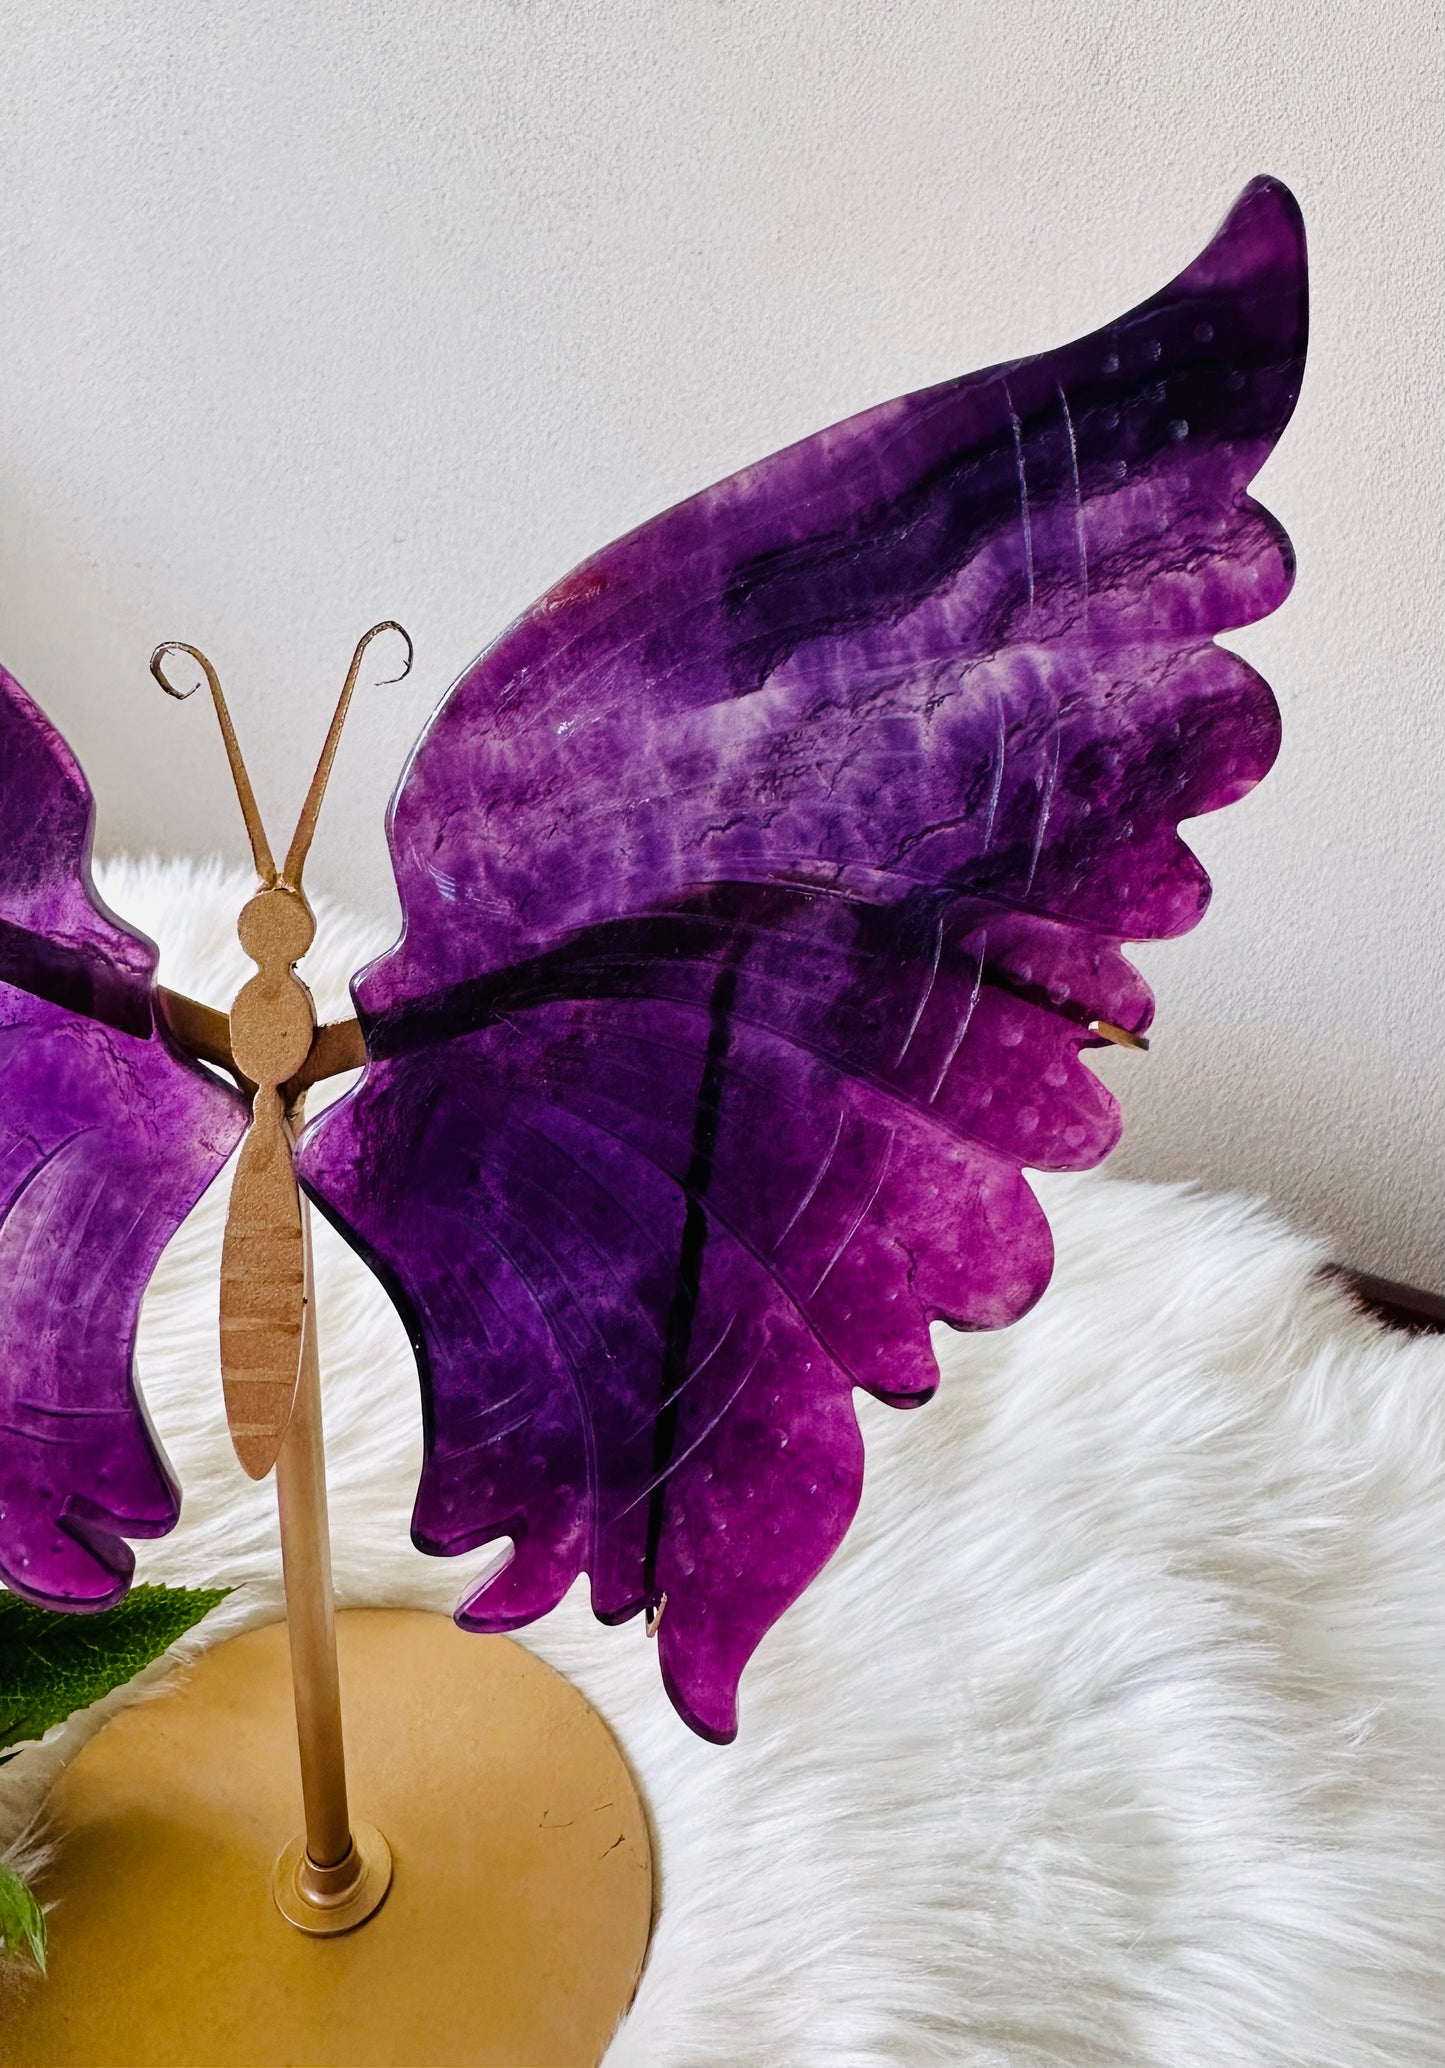 Sometimes, there are no words for the beauty I see. I cannot describe the intense energy & grace of this set. The most beautiful large 30cm (inc stand) purple fluorite butterfly wings on gold stand absolutely breathtaking….